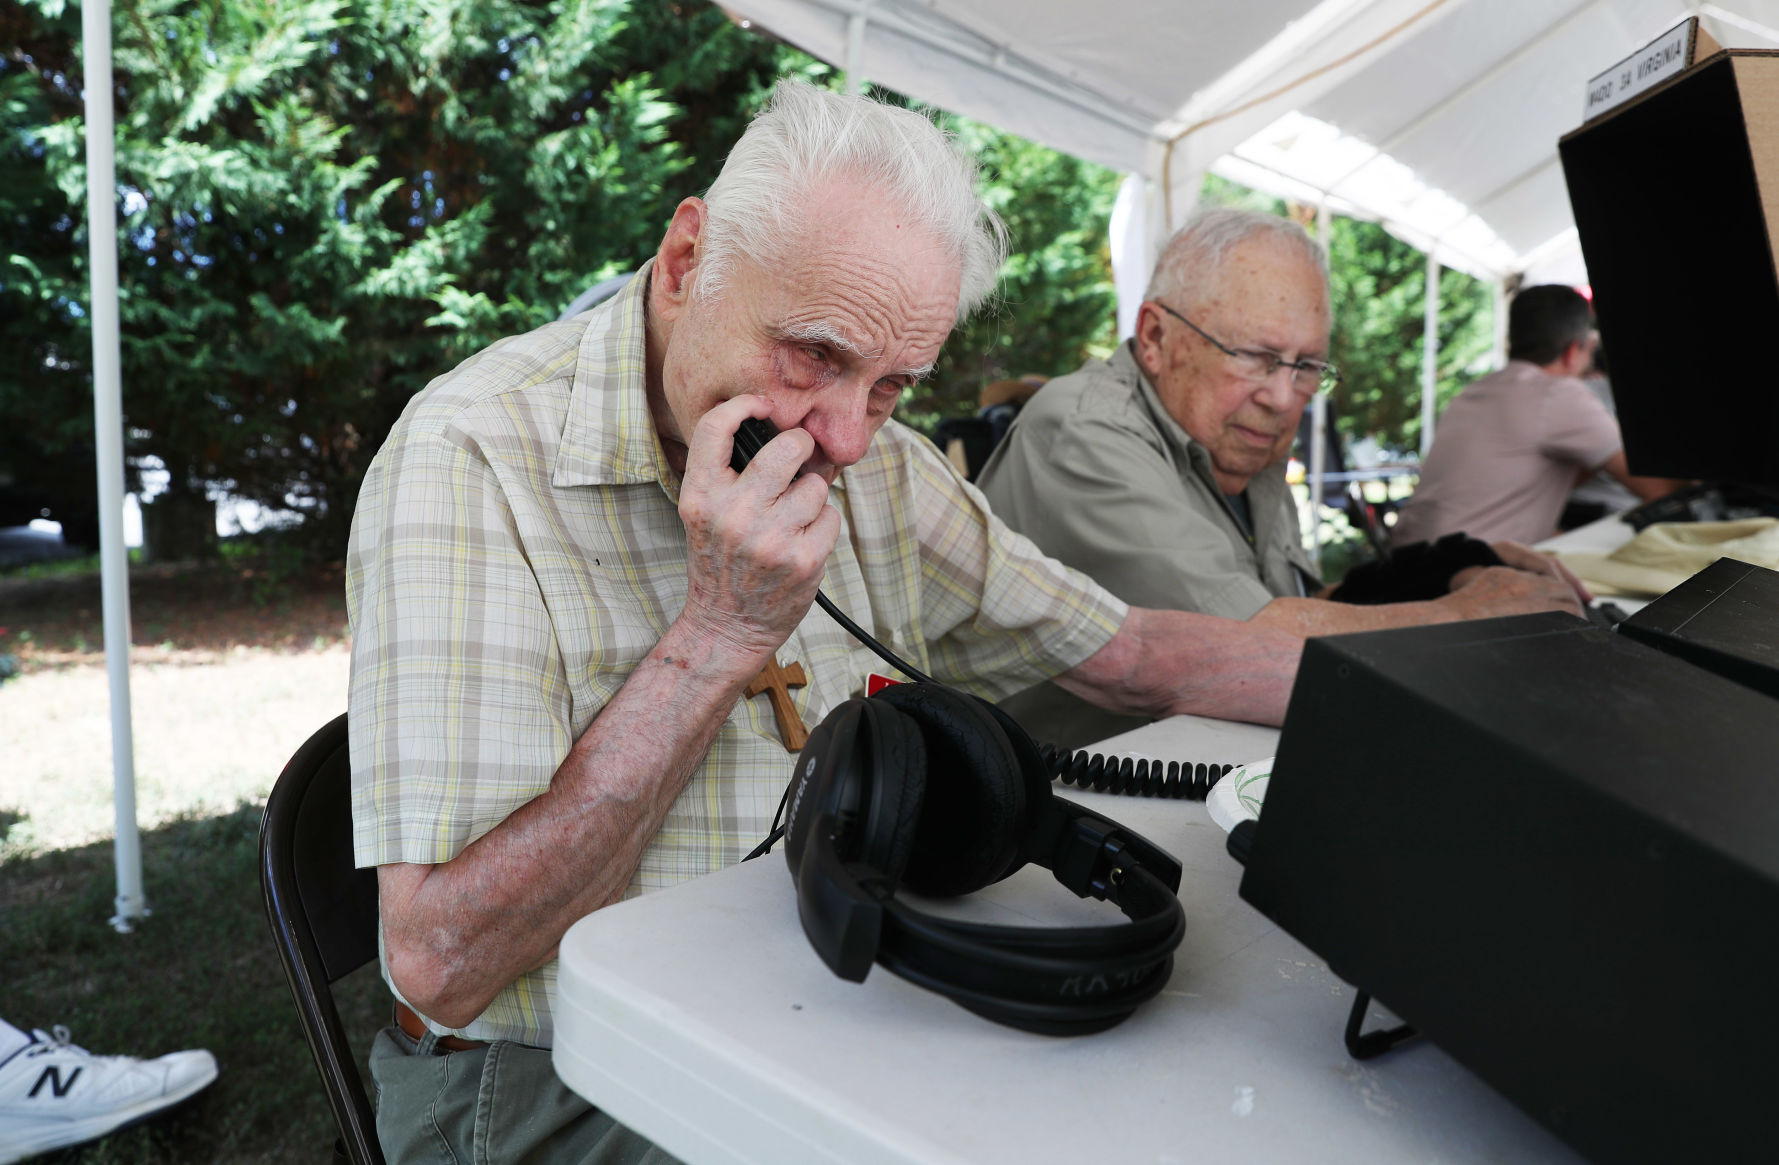 At field day, ham radio enthusiasts show off their magic picture image